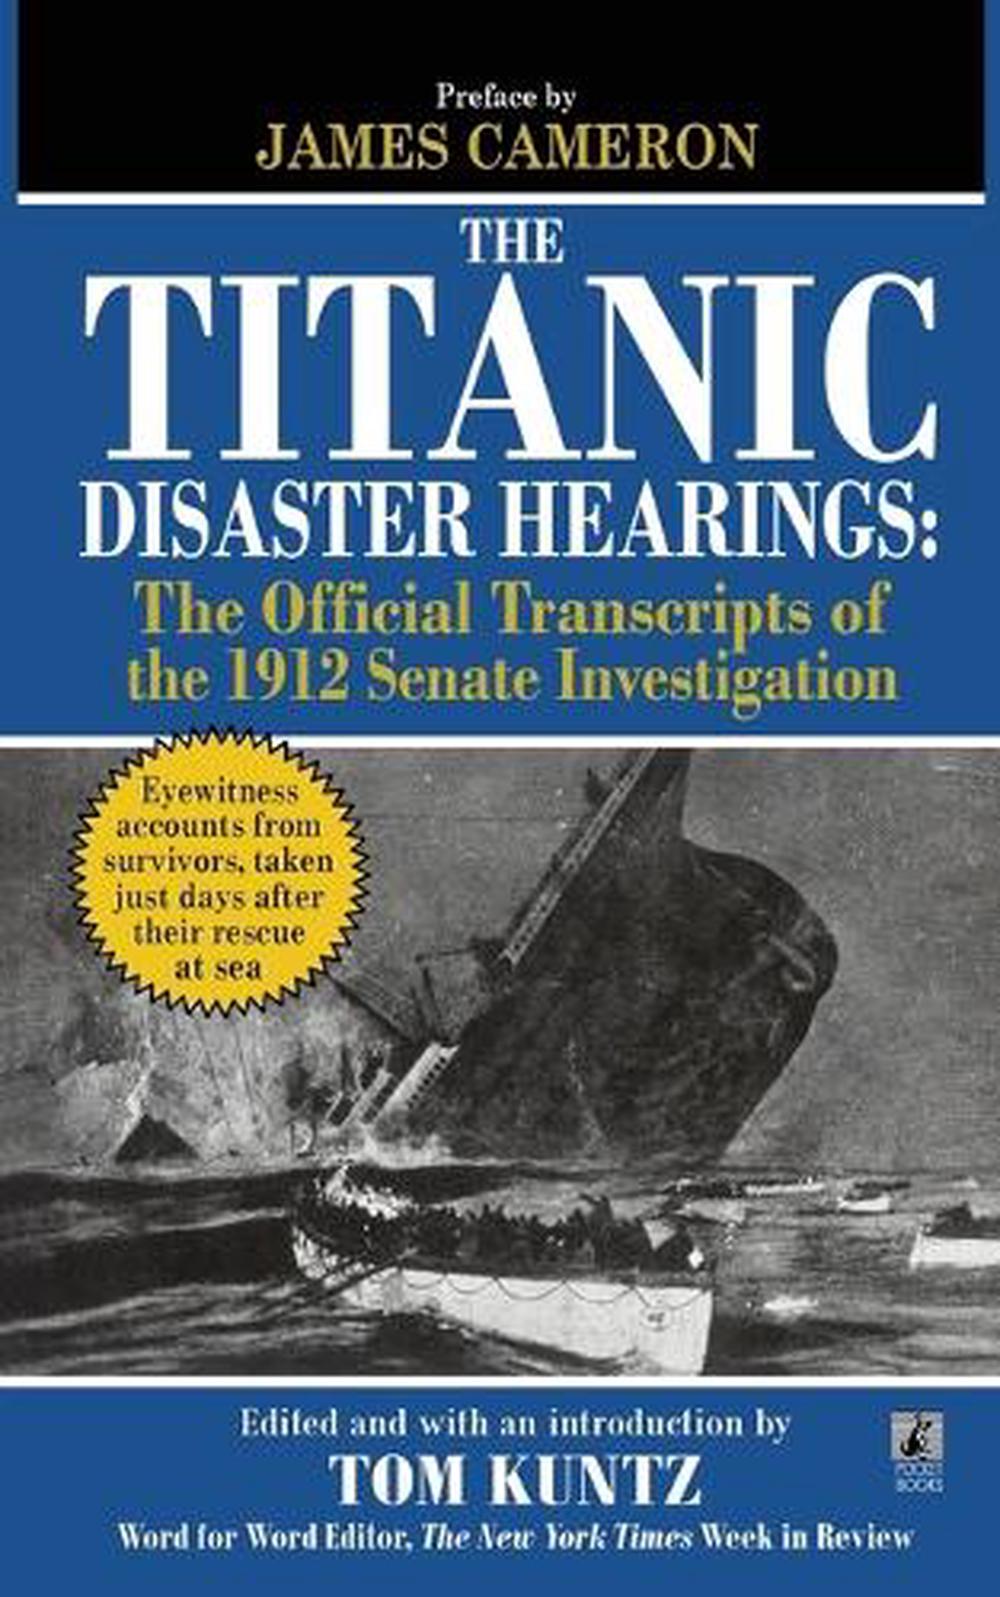 Kuntz　PicClick　THE　Tom　$79.51　Hearings　AU　Paperback　Book　by　DISASTER　TITANIC　(English)